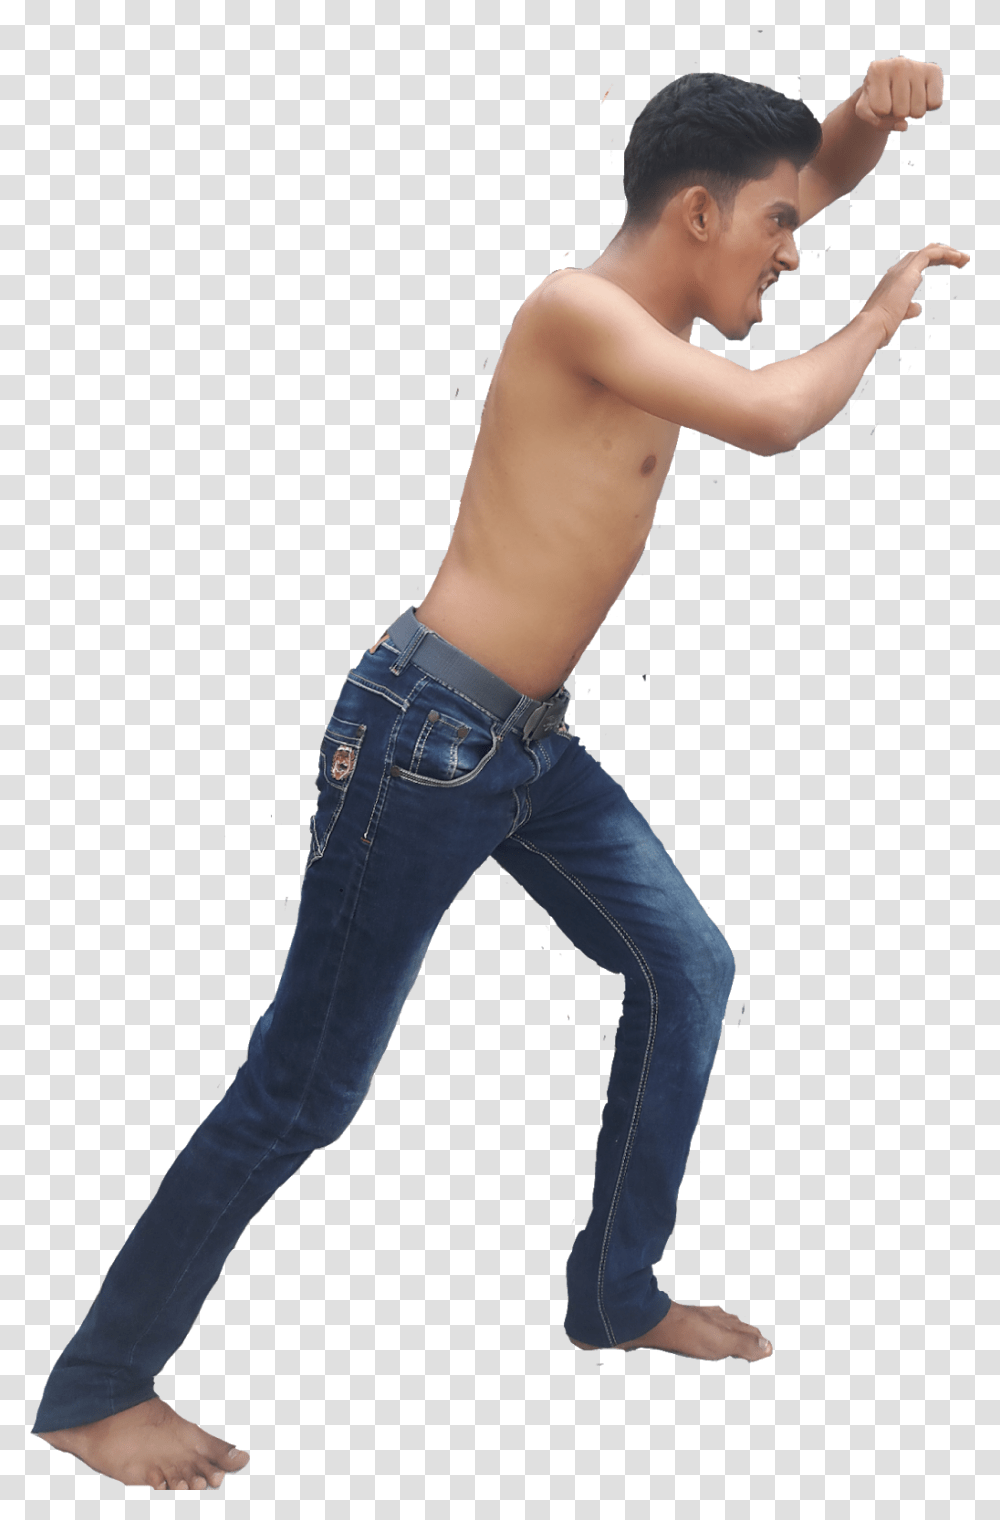 Tiger Photoediting Model Barechested, Pants, Apparel, Jeans Transparent Png